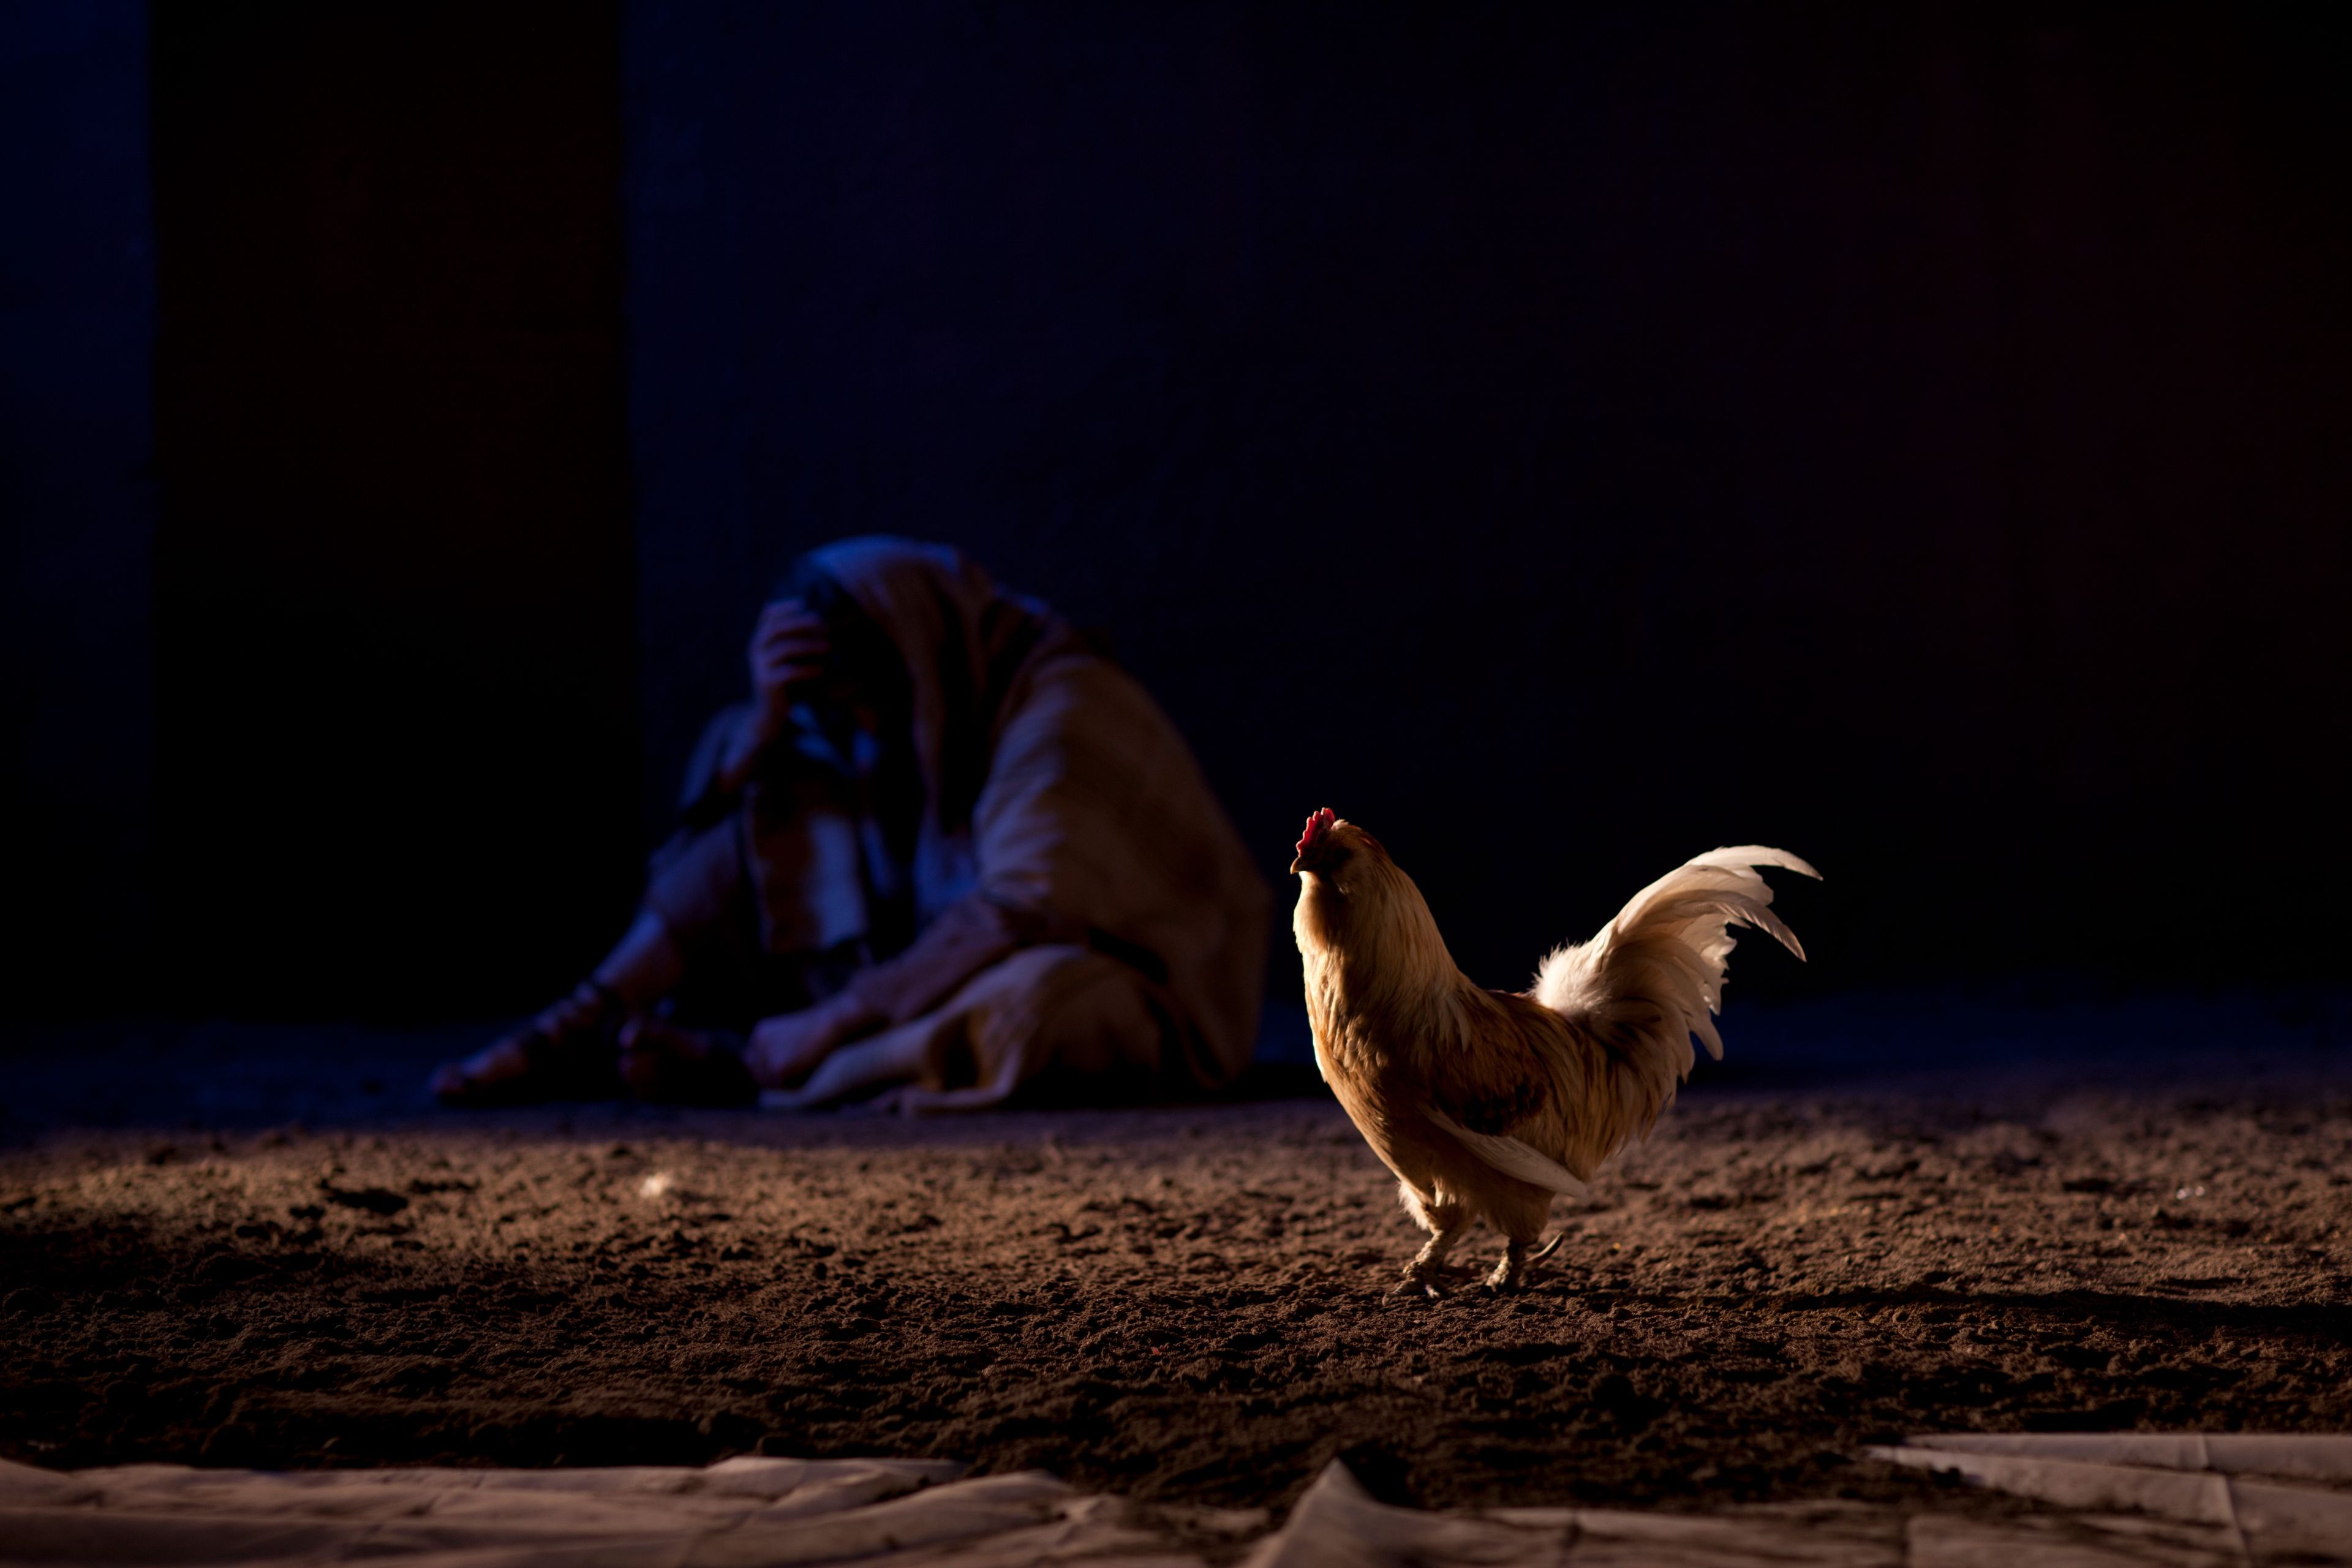 Peter in despair, sitting near a rooster after having denied Christ.